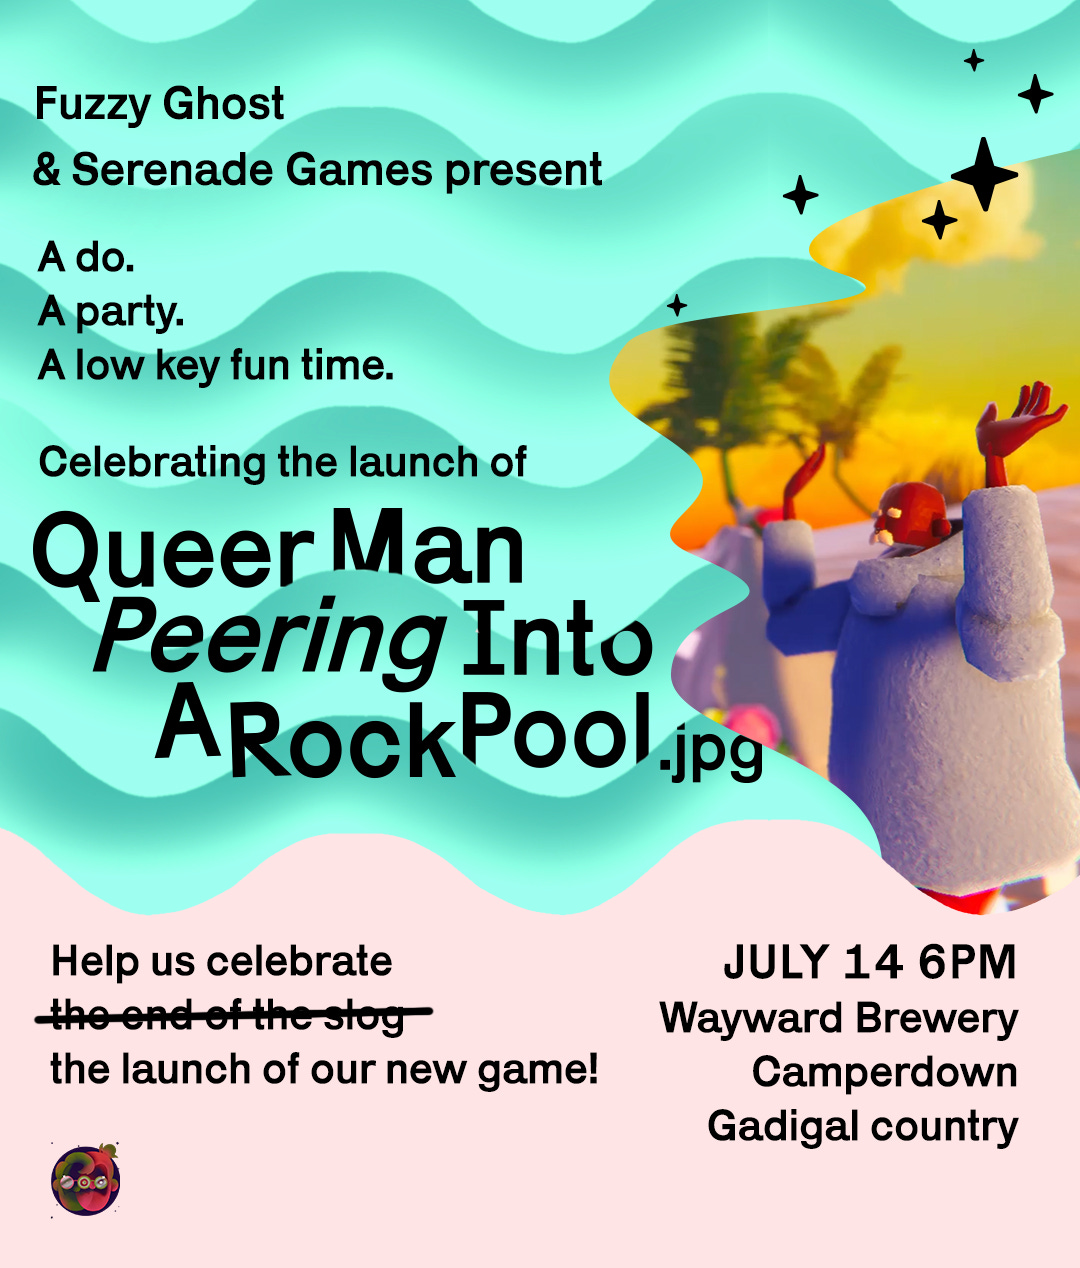 A poster inviting you to the Queer Man Peering Into A Rock Pool.jpg launch party. July 14, 6pm, Wayward Brewery, Camperdown, Gadigal country.